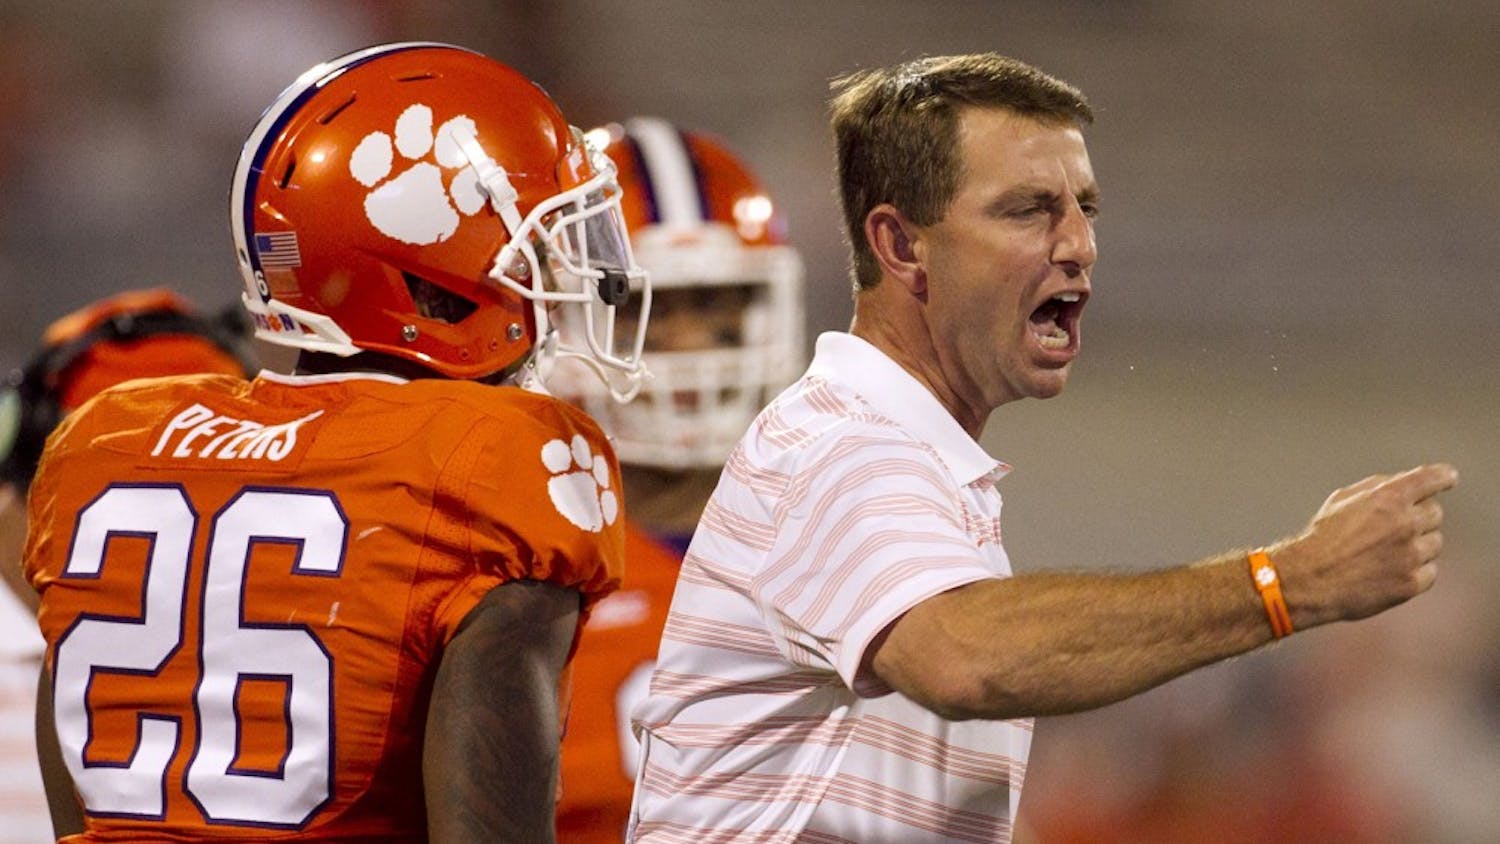 Clemson head coach Dabo Swinney yells at his defensive unit during a timeout in the fourth quarter against North Carolina at Memorial Stadium in Clemson, S.C., on Saturday, Sept. 27, 2014. Clemson won, 50-35. (Robert Willett/Raleigh News &amp; Observer/MCT)